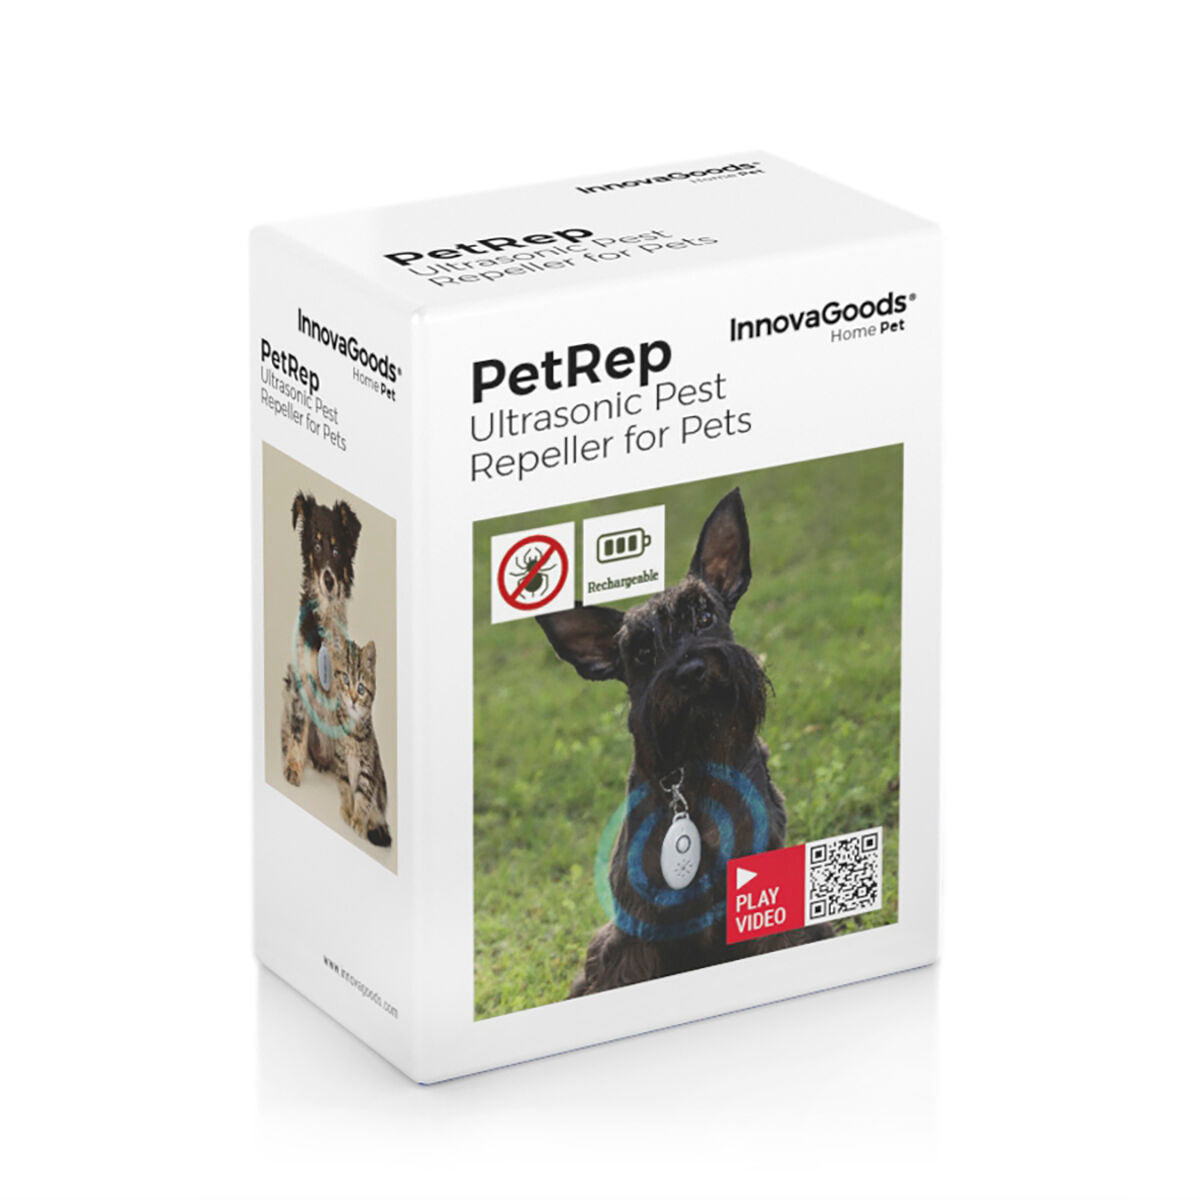 Rechargeable Ultrasound Parasite Repellent for Pets PetRep InnovaGoods